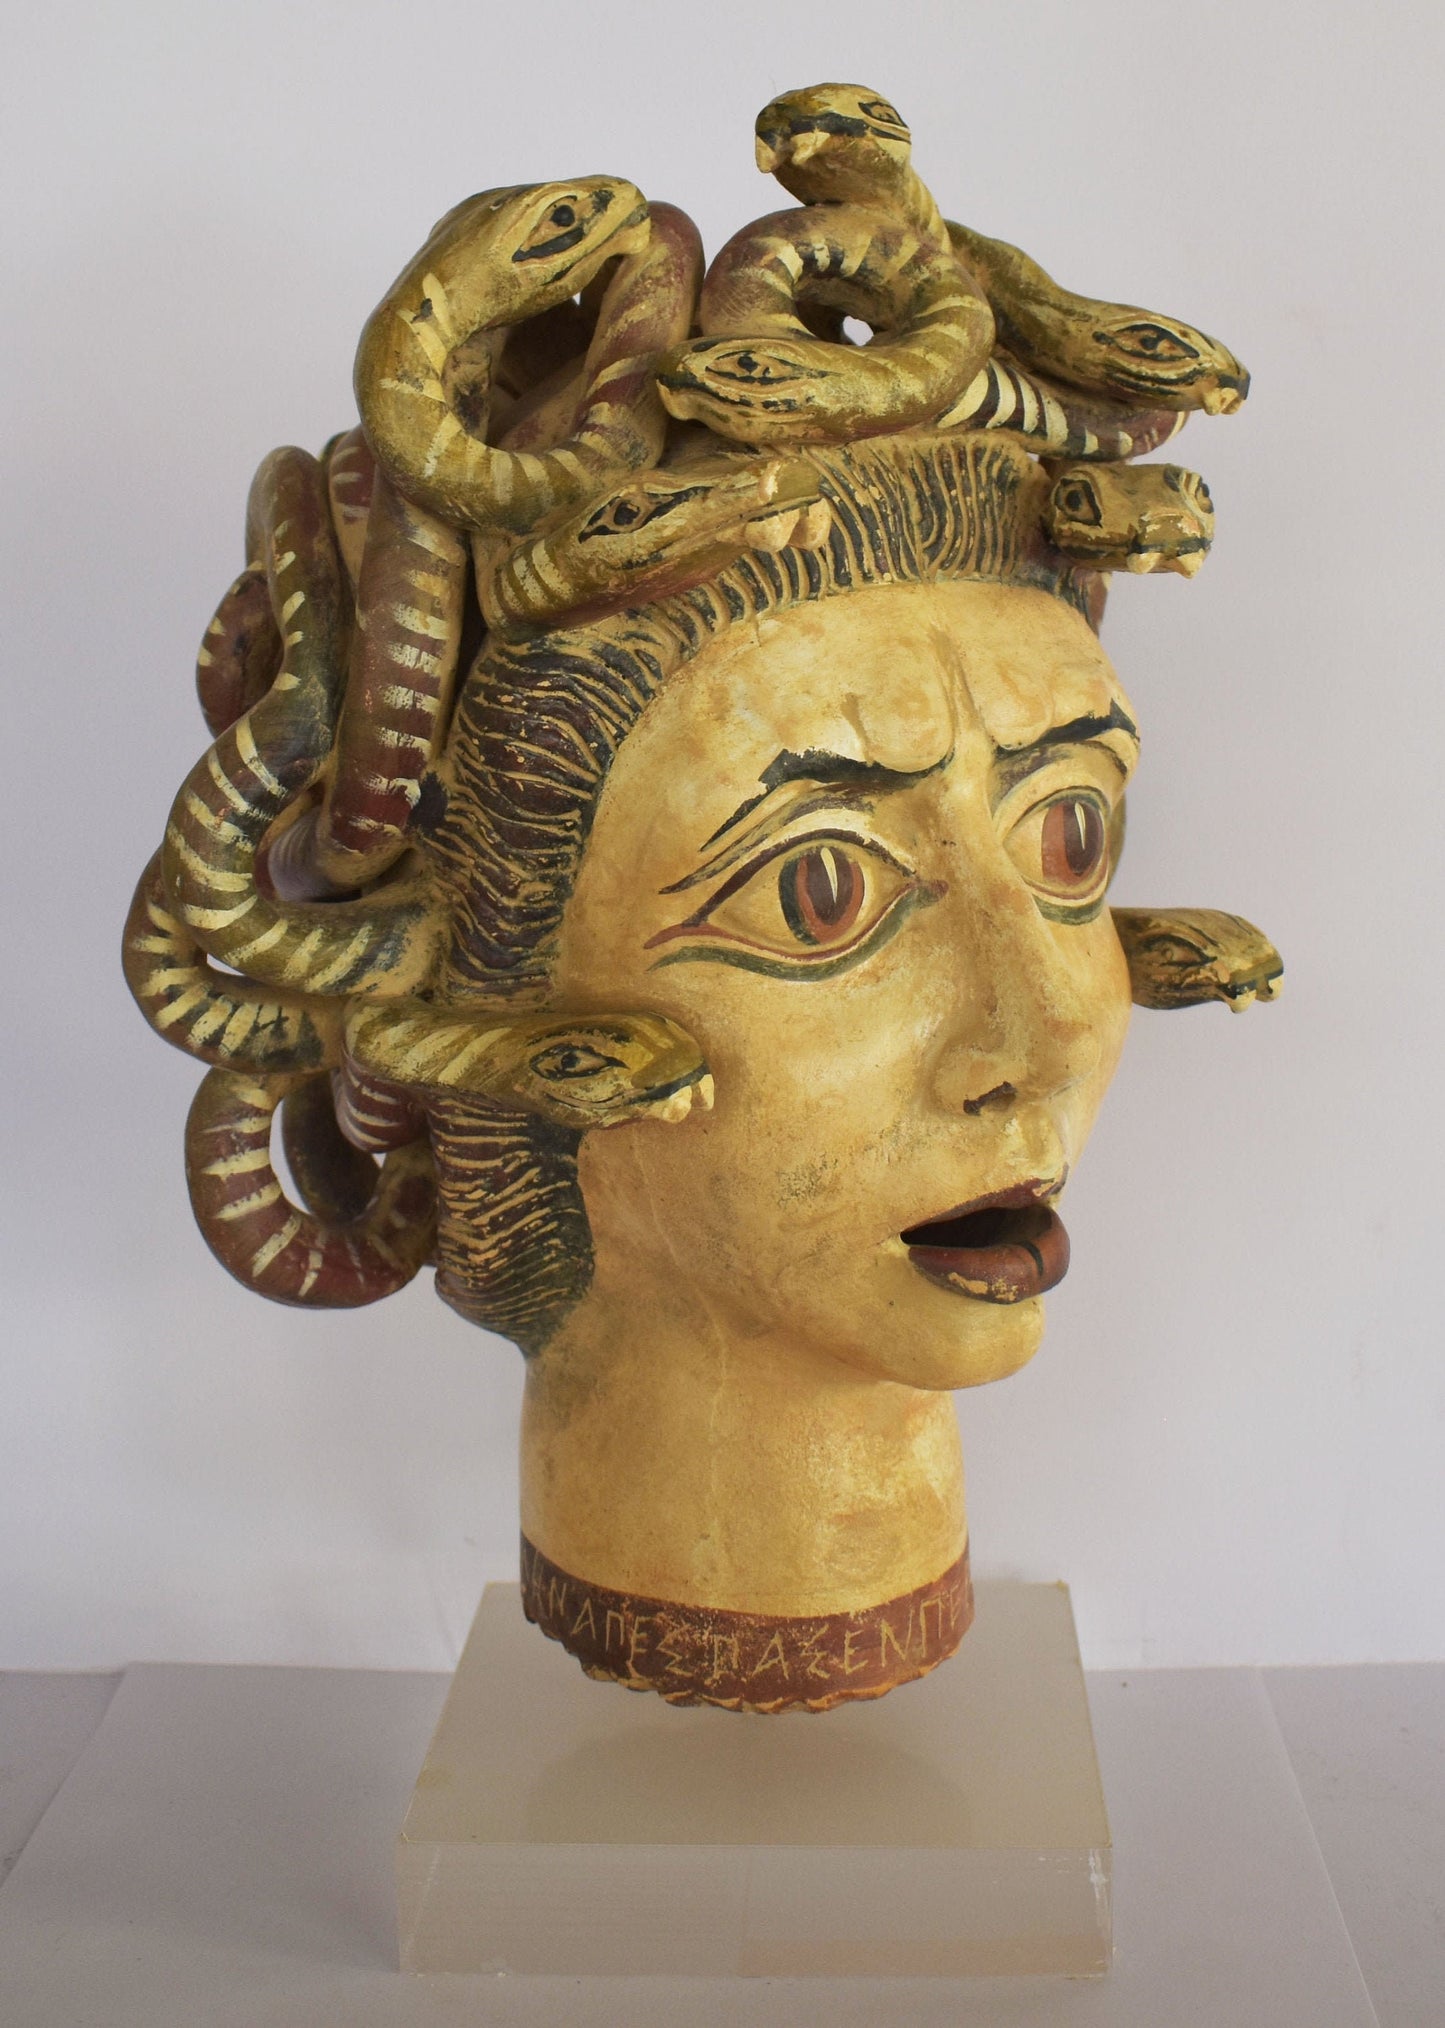 Medusa Head - Snake-Haired Gorgon - Symbol of natural cycle of birth, death and rebirth - Plexiglass Base - Ceramic Artifact